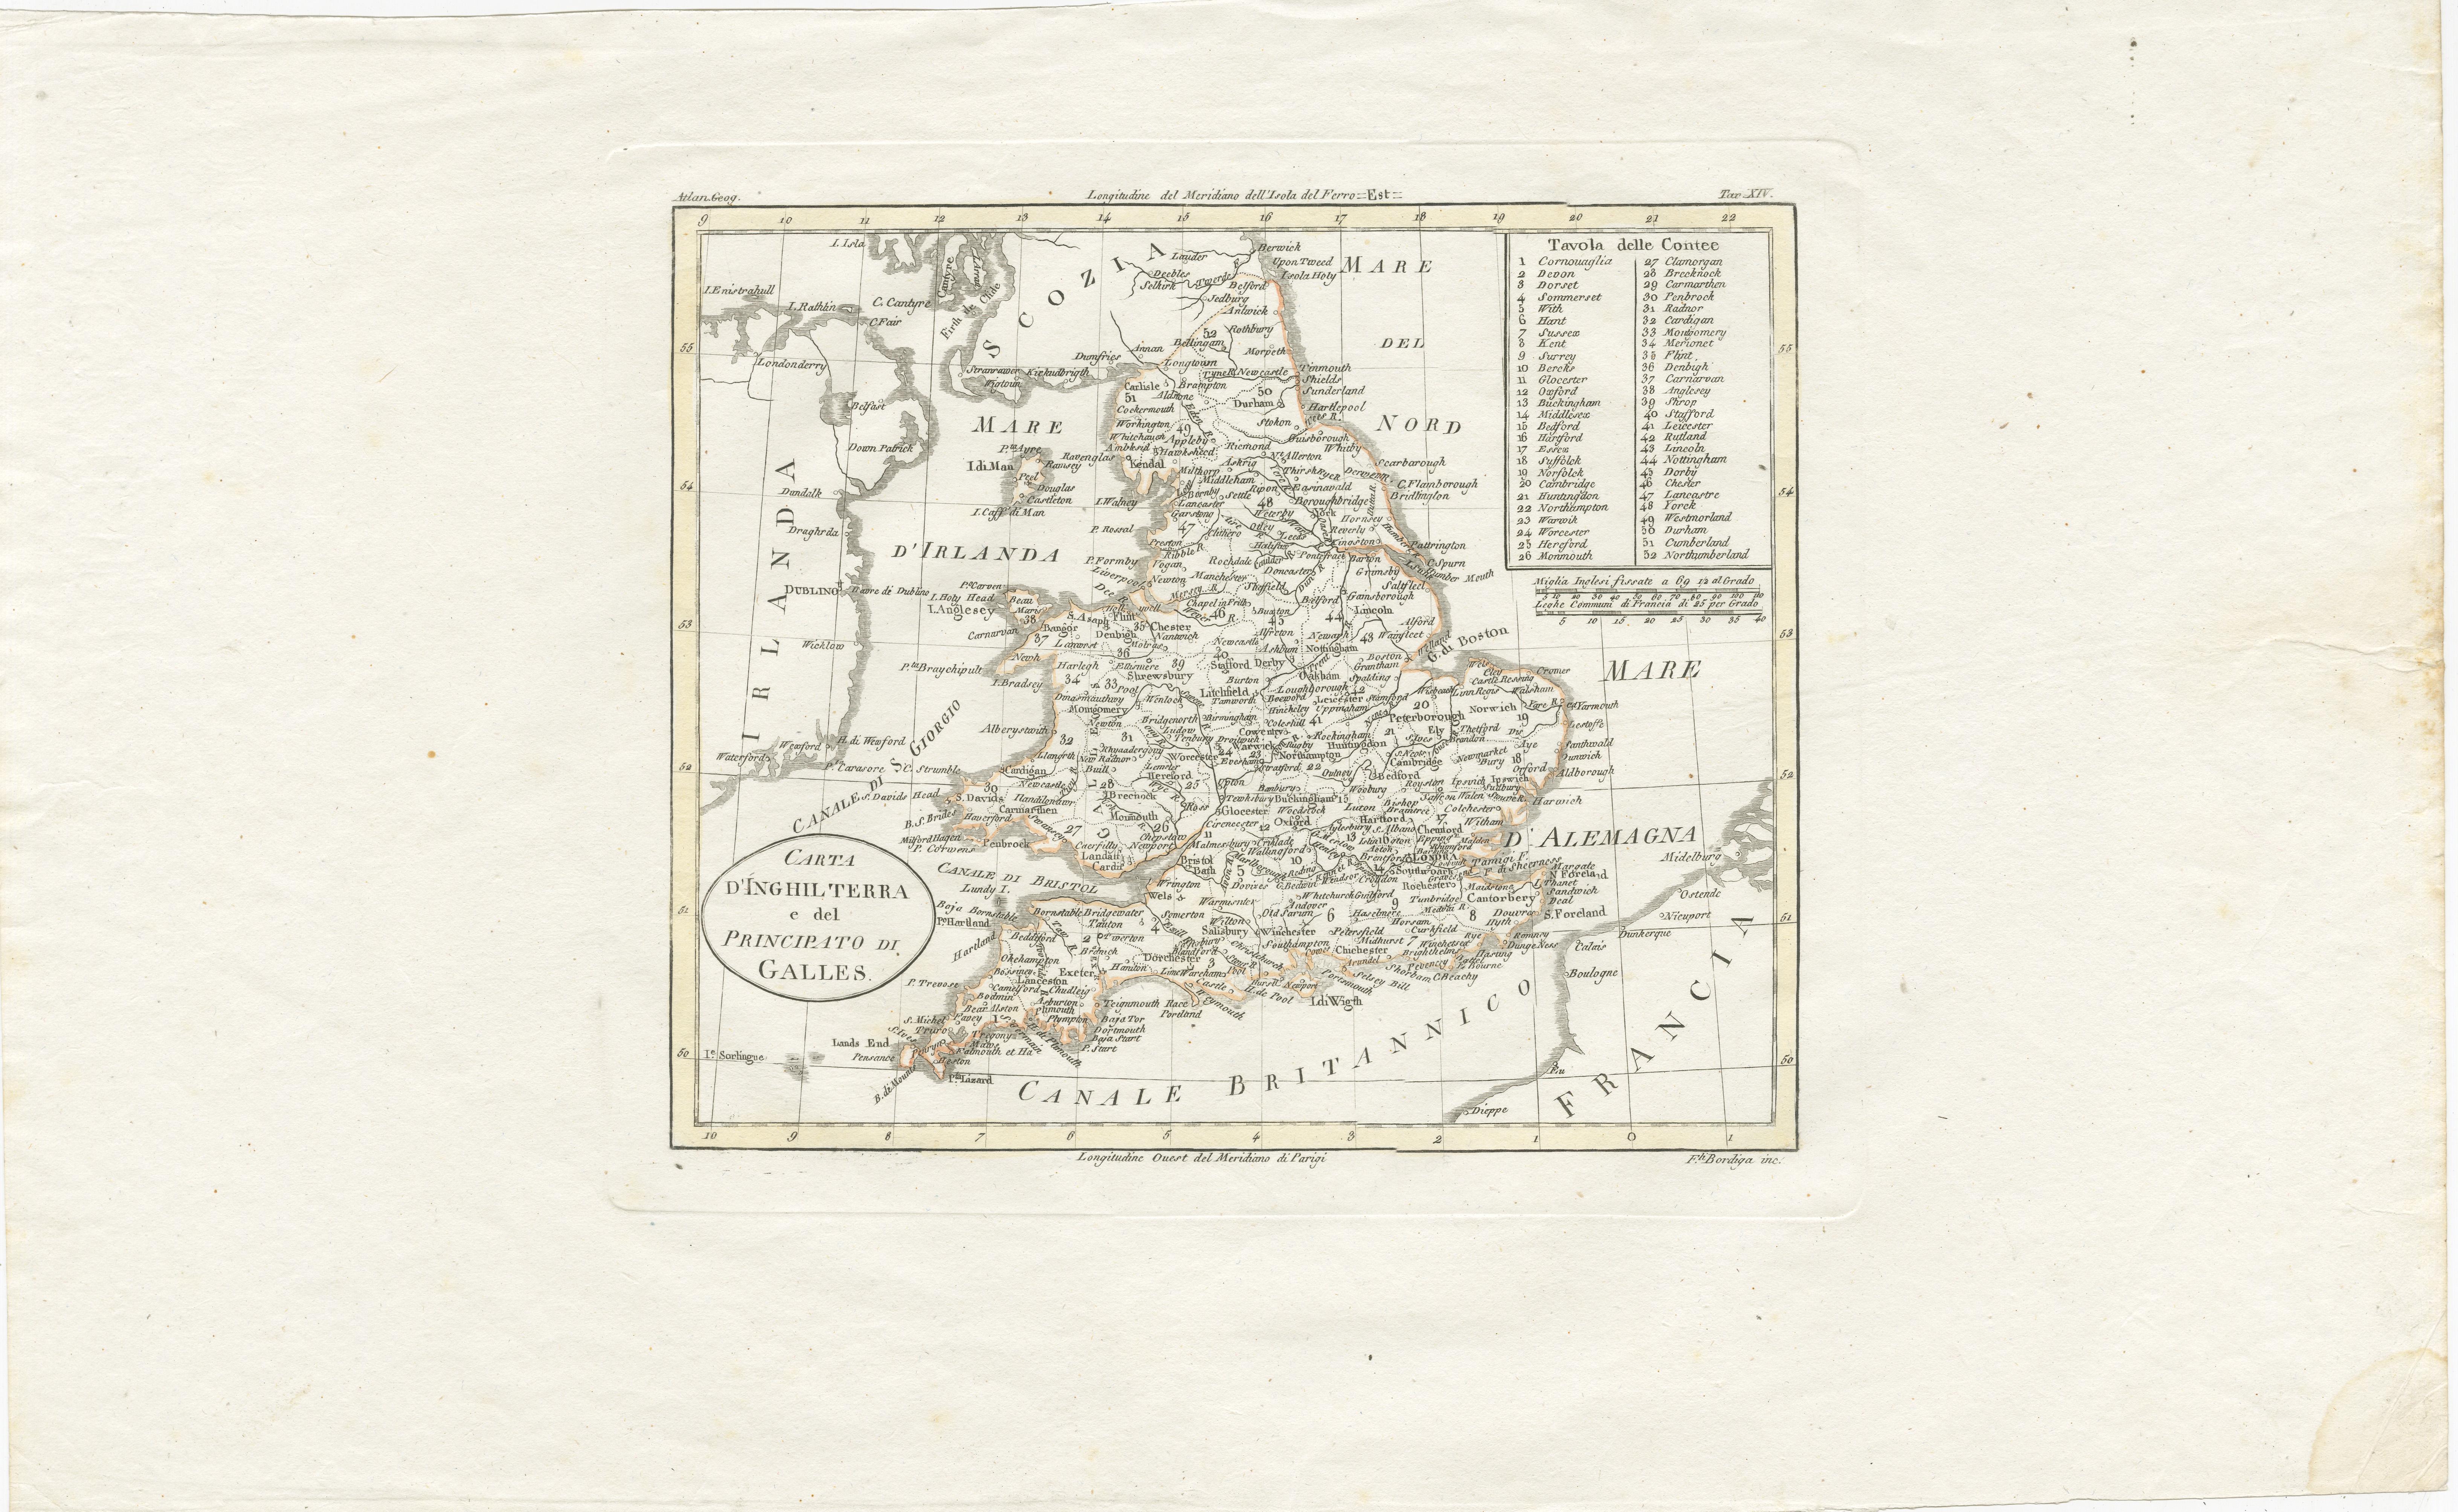 Antique map titled 'Carta d'Inghilterra e del Principato di Galles'. Detailed map of Britain, Wales and the coast of Ireland with a list of counties. This map originates from 'Nuovo Atlante Di Geografia Universale (..)' published in Milan by Batelli